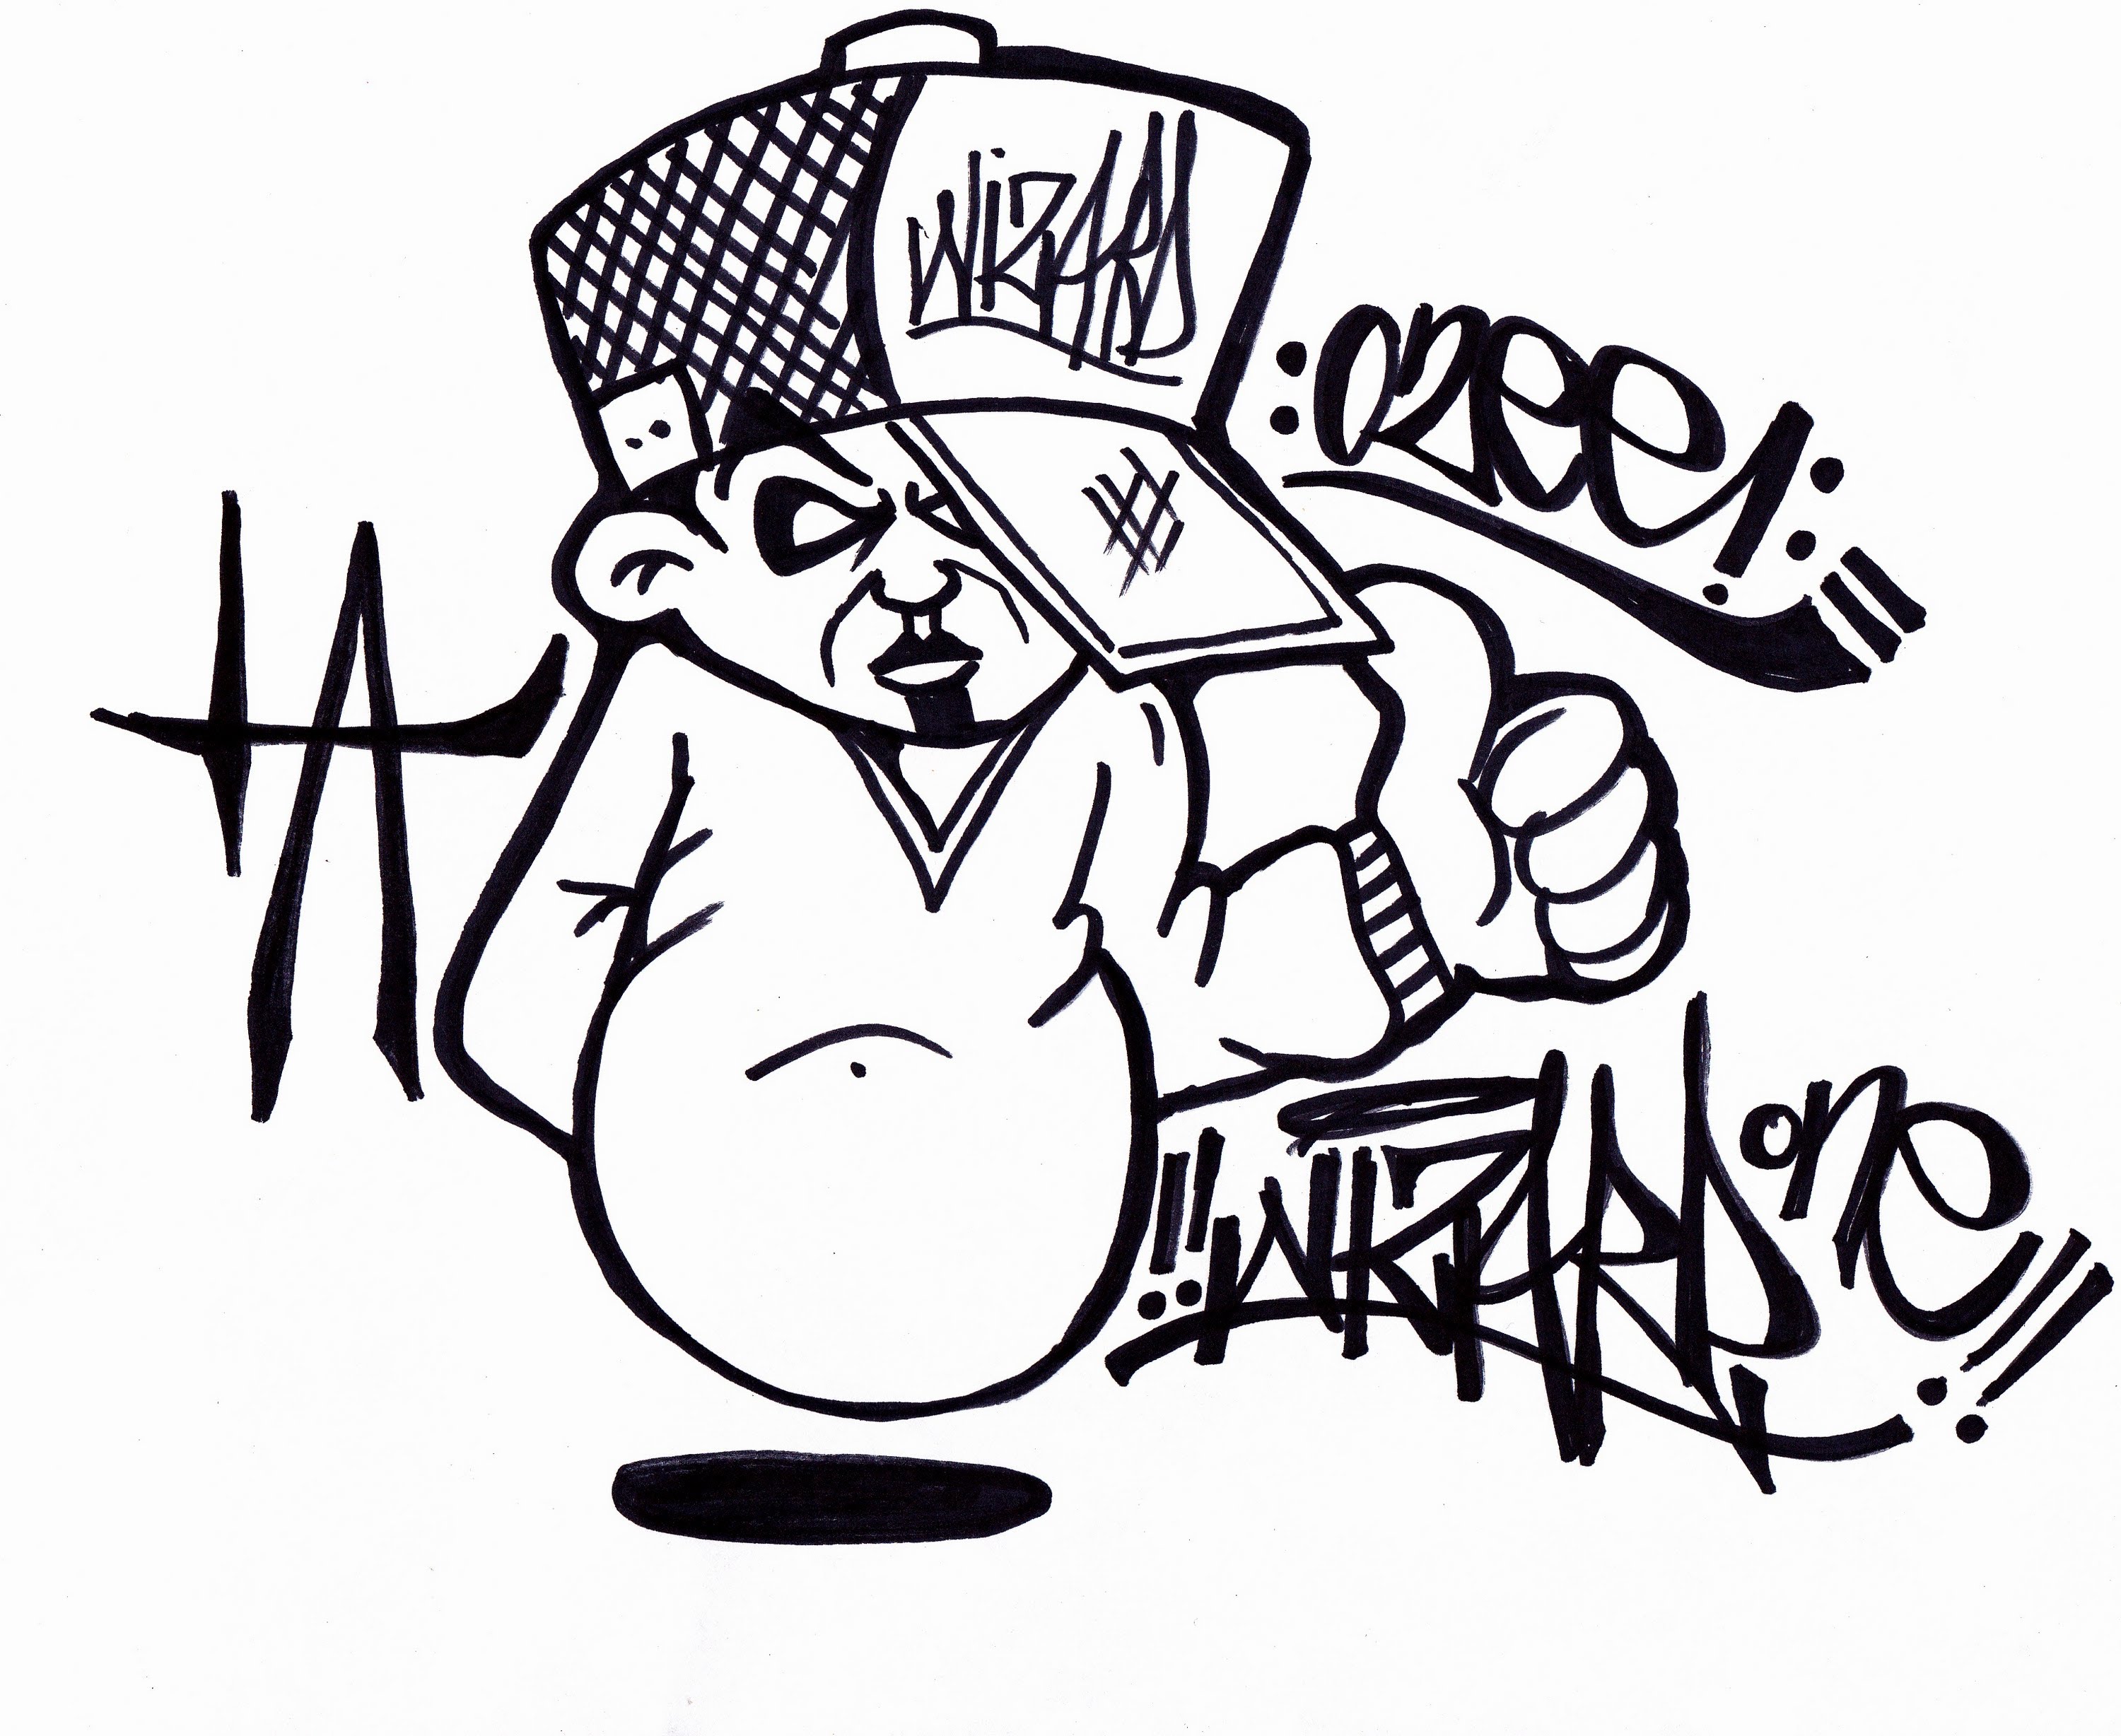 How to draw a graffiti character 2013 - YouTube